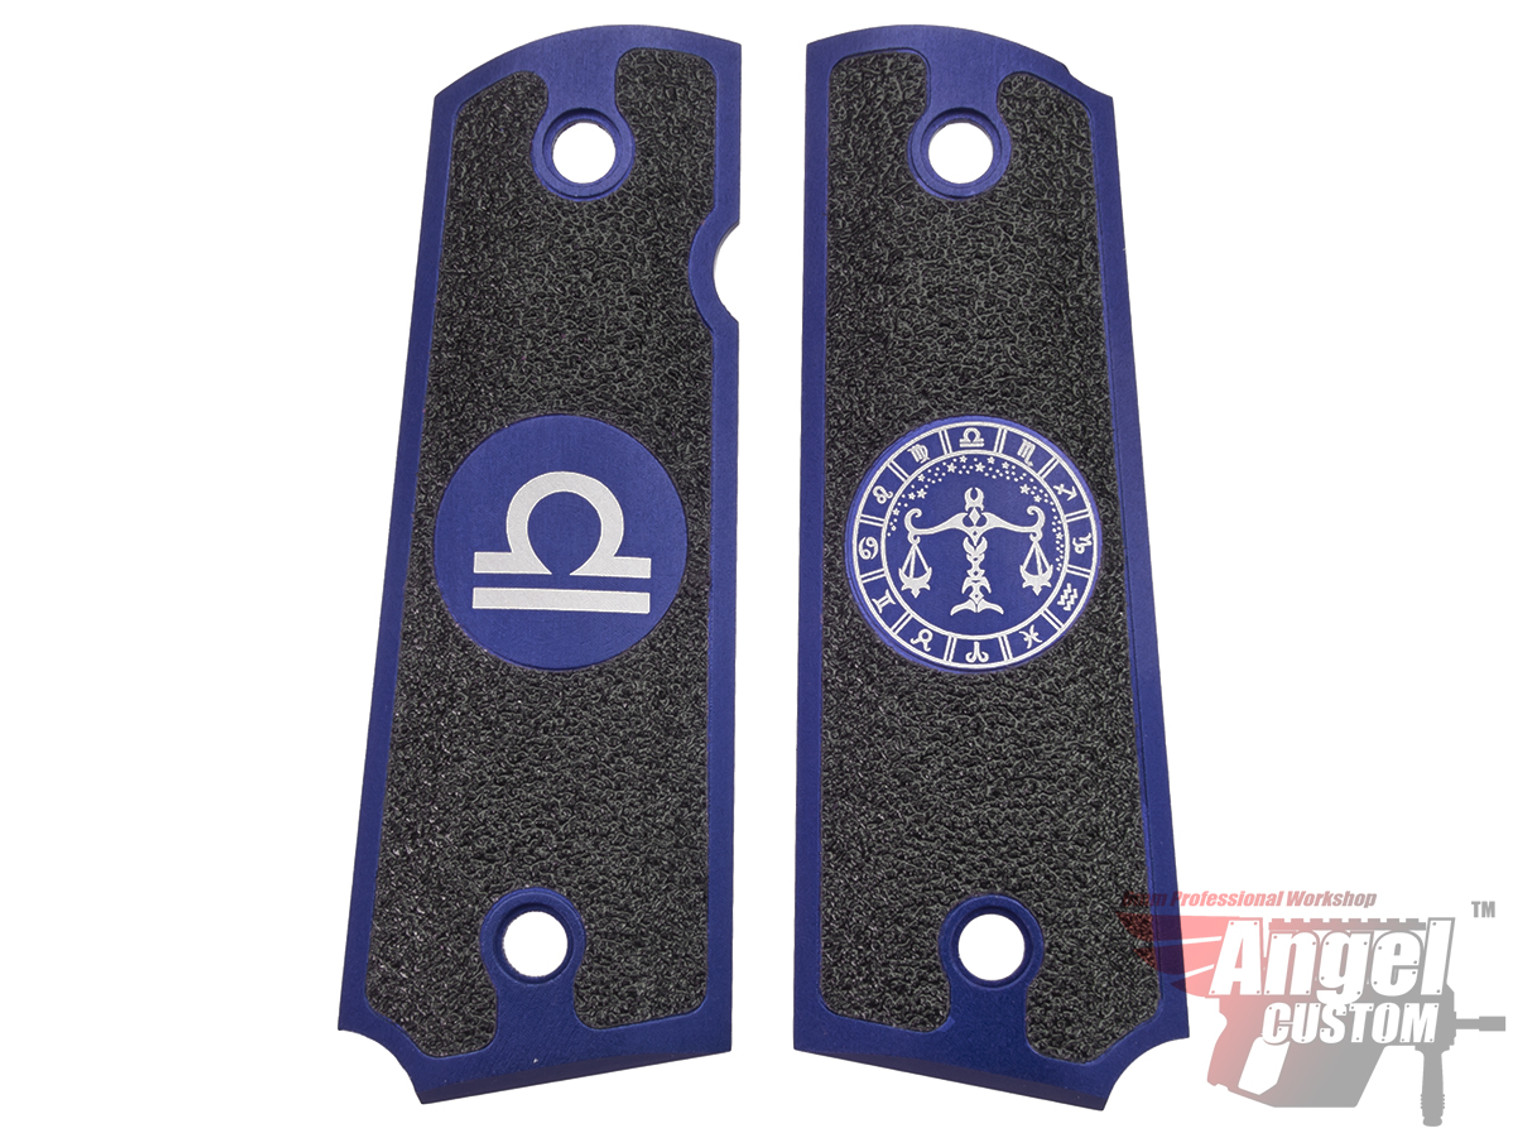 Angel Custom CNC Machined Tac-Glove "Zodiac" Grips for WE-Tech 1911 Series Airsoft Pistols - Navy Blue (Sign: Libra)